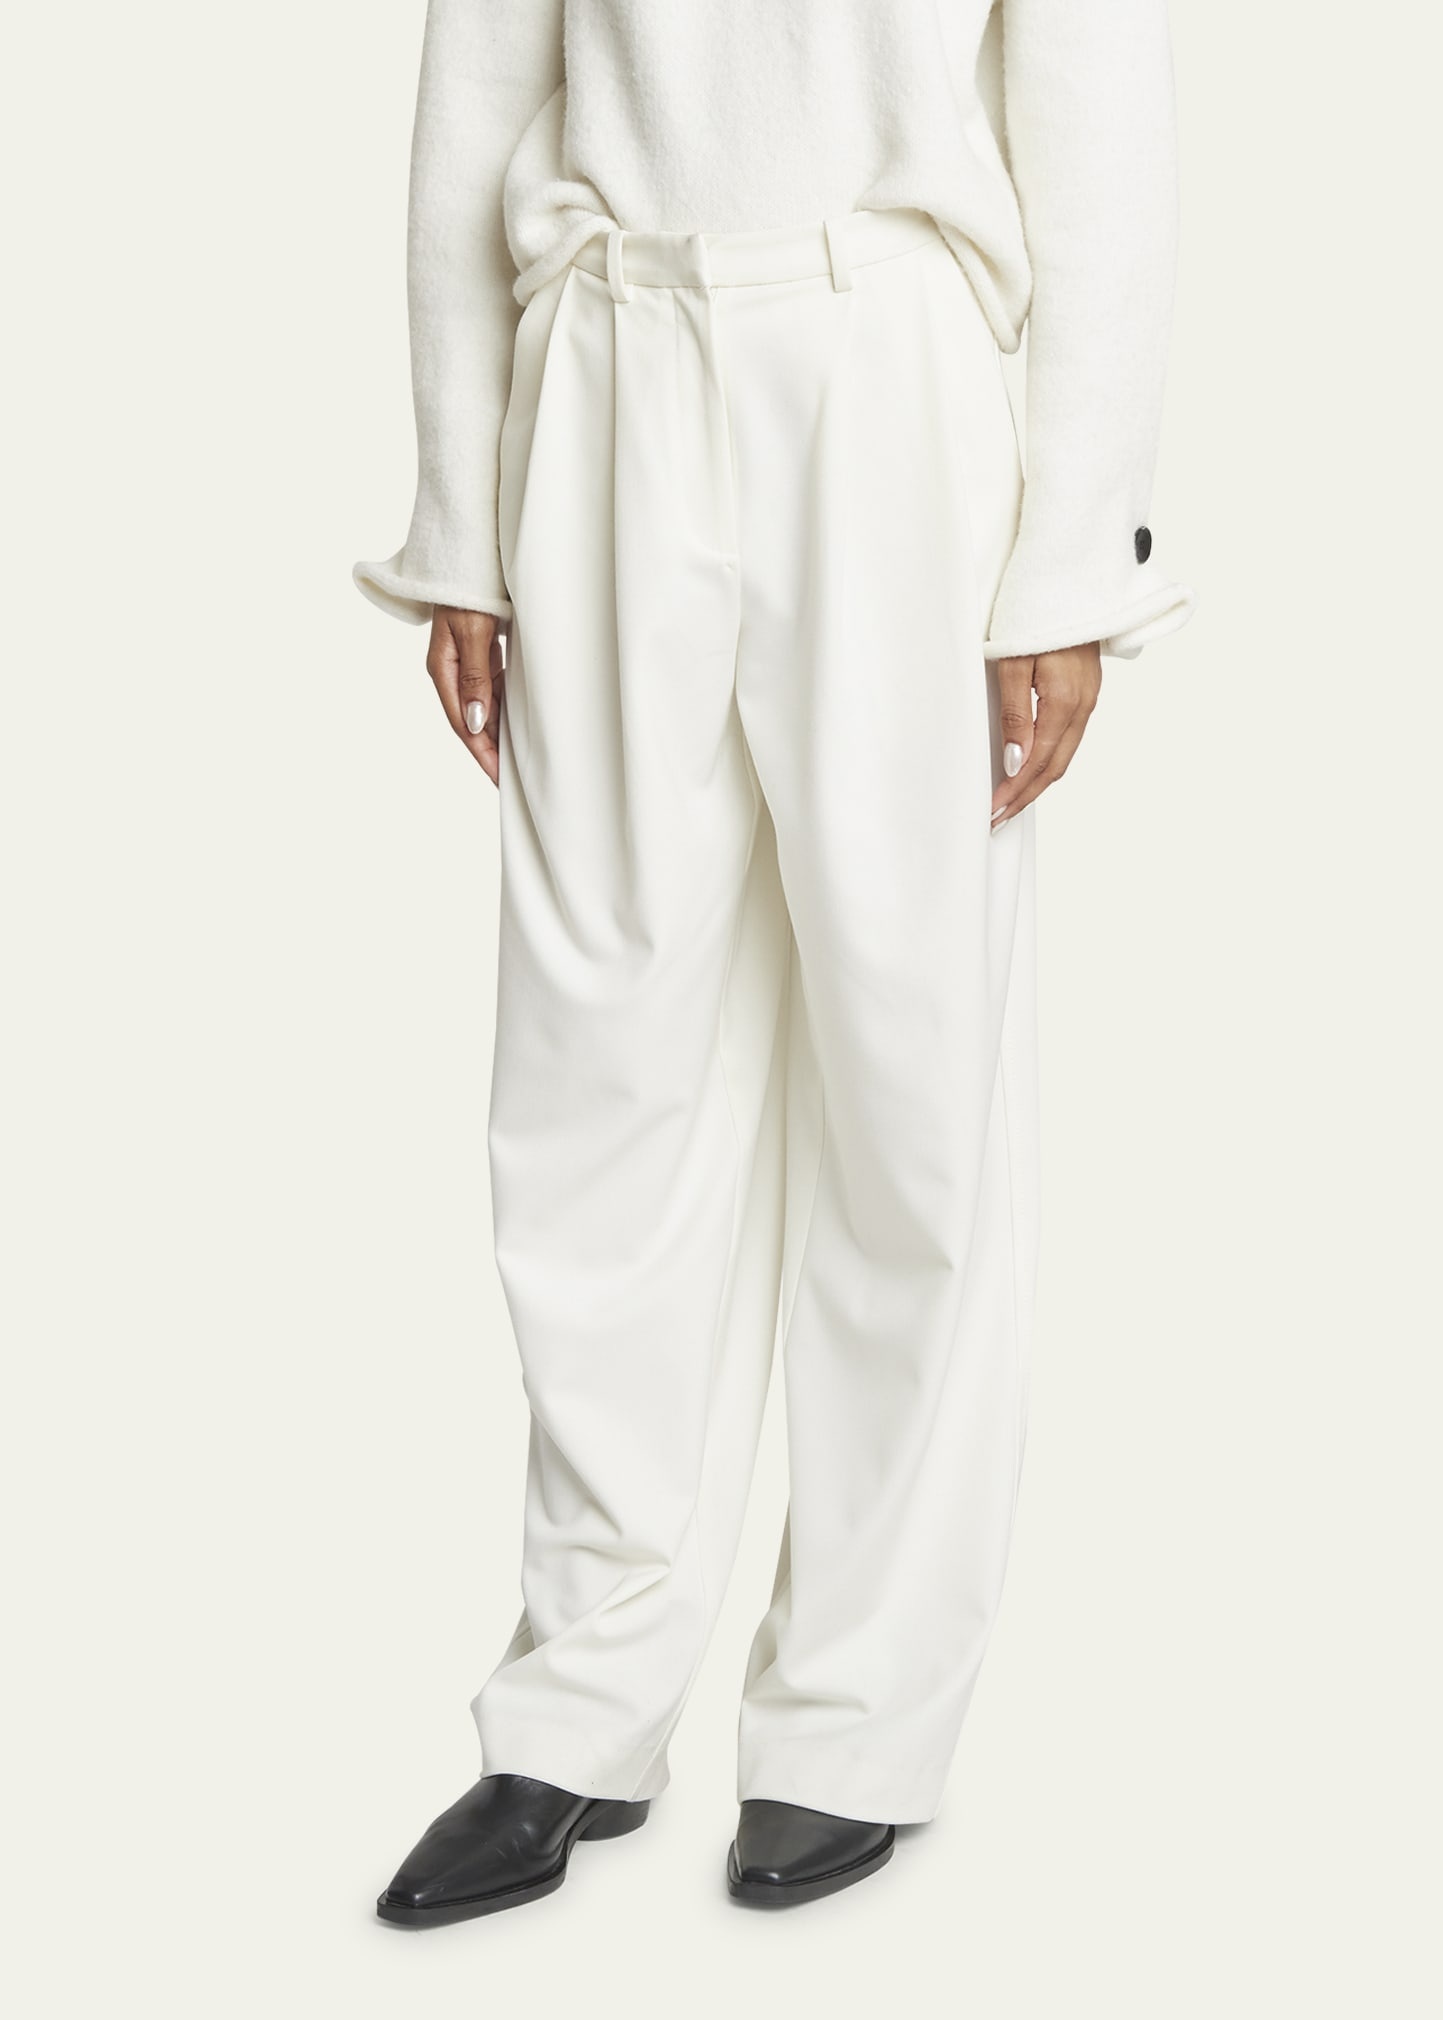 Eleanor Slouchy Suiting Pants - 4